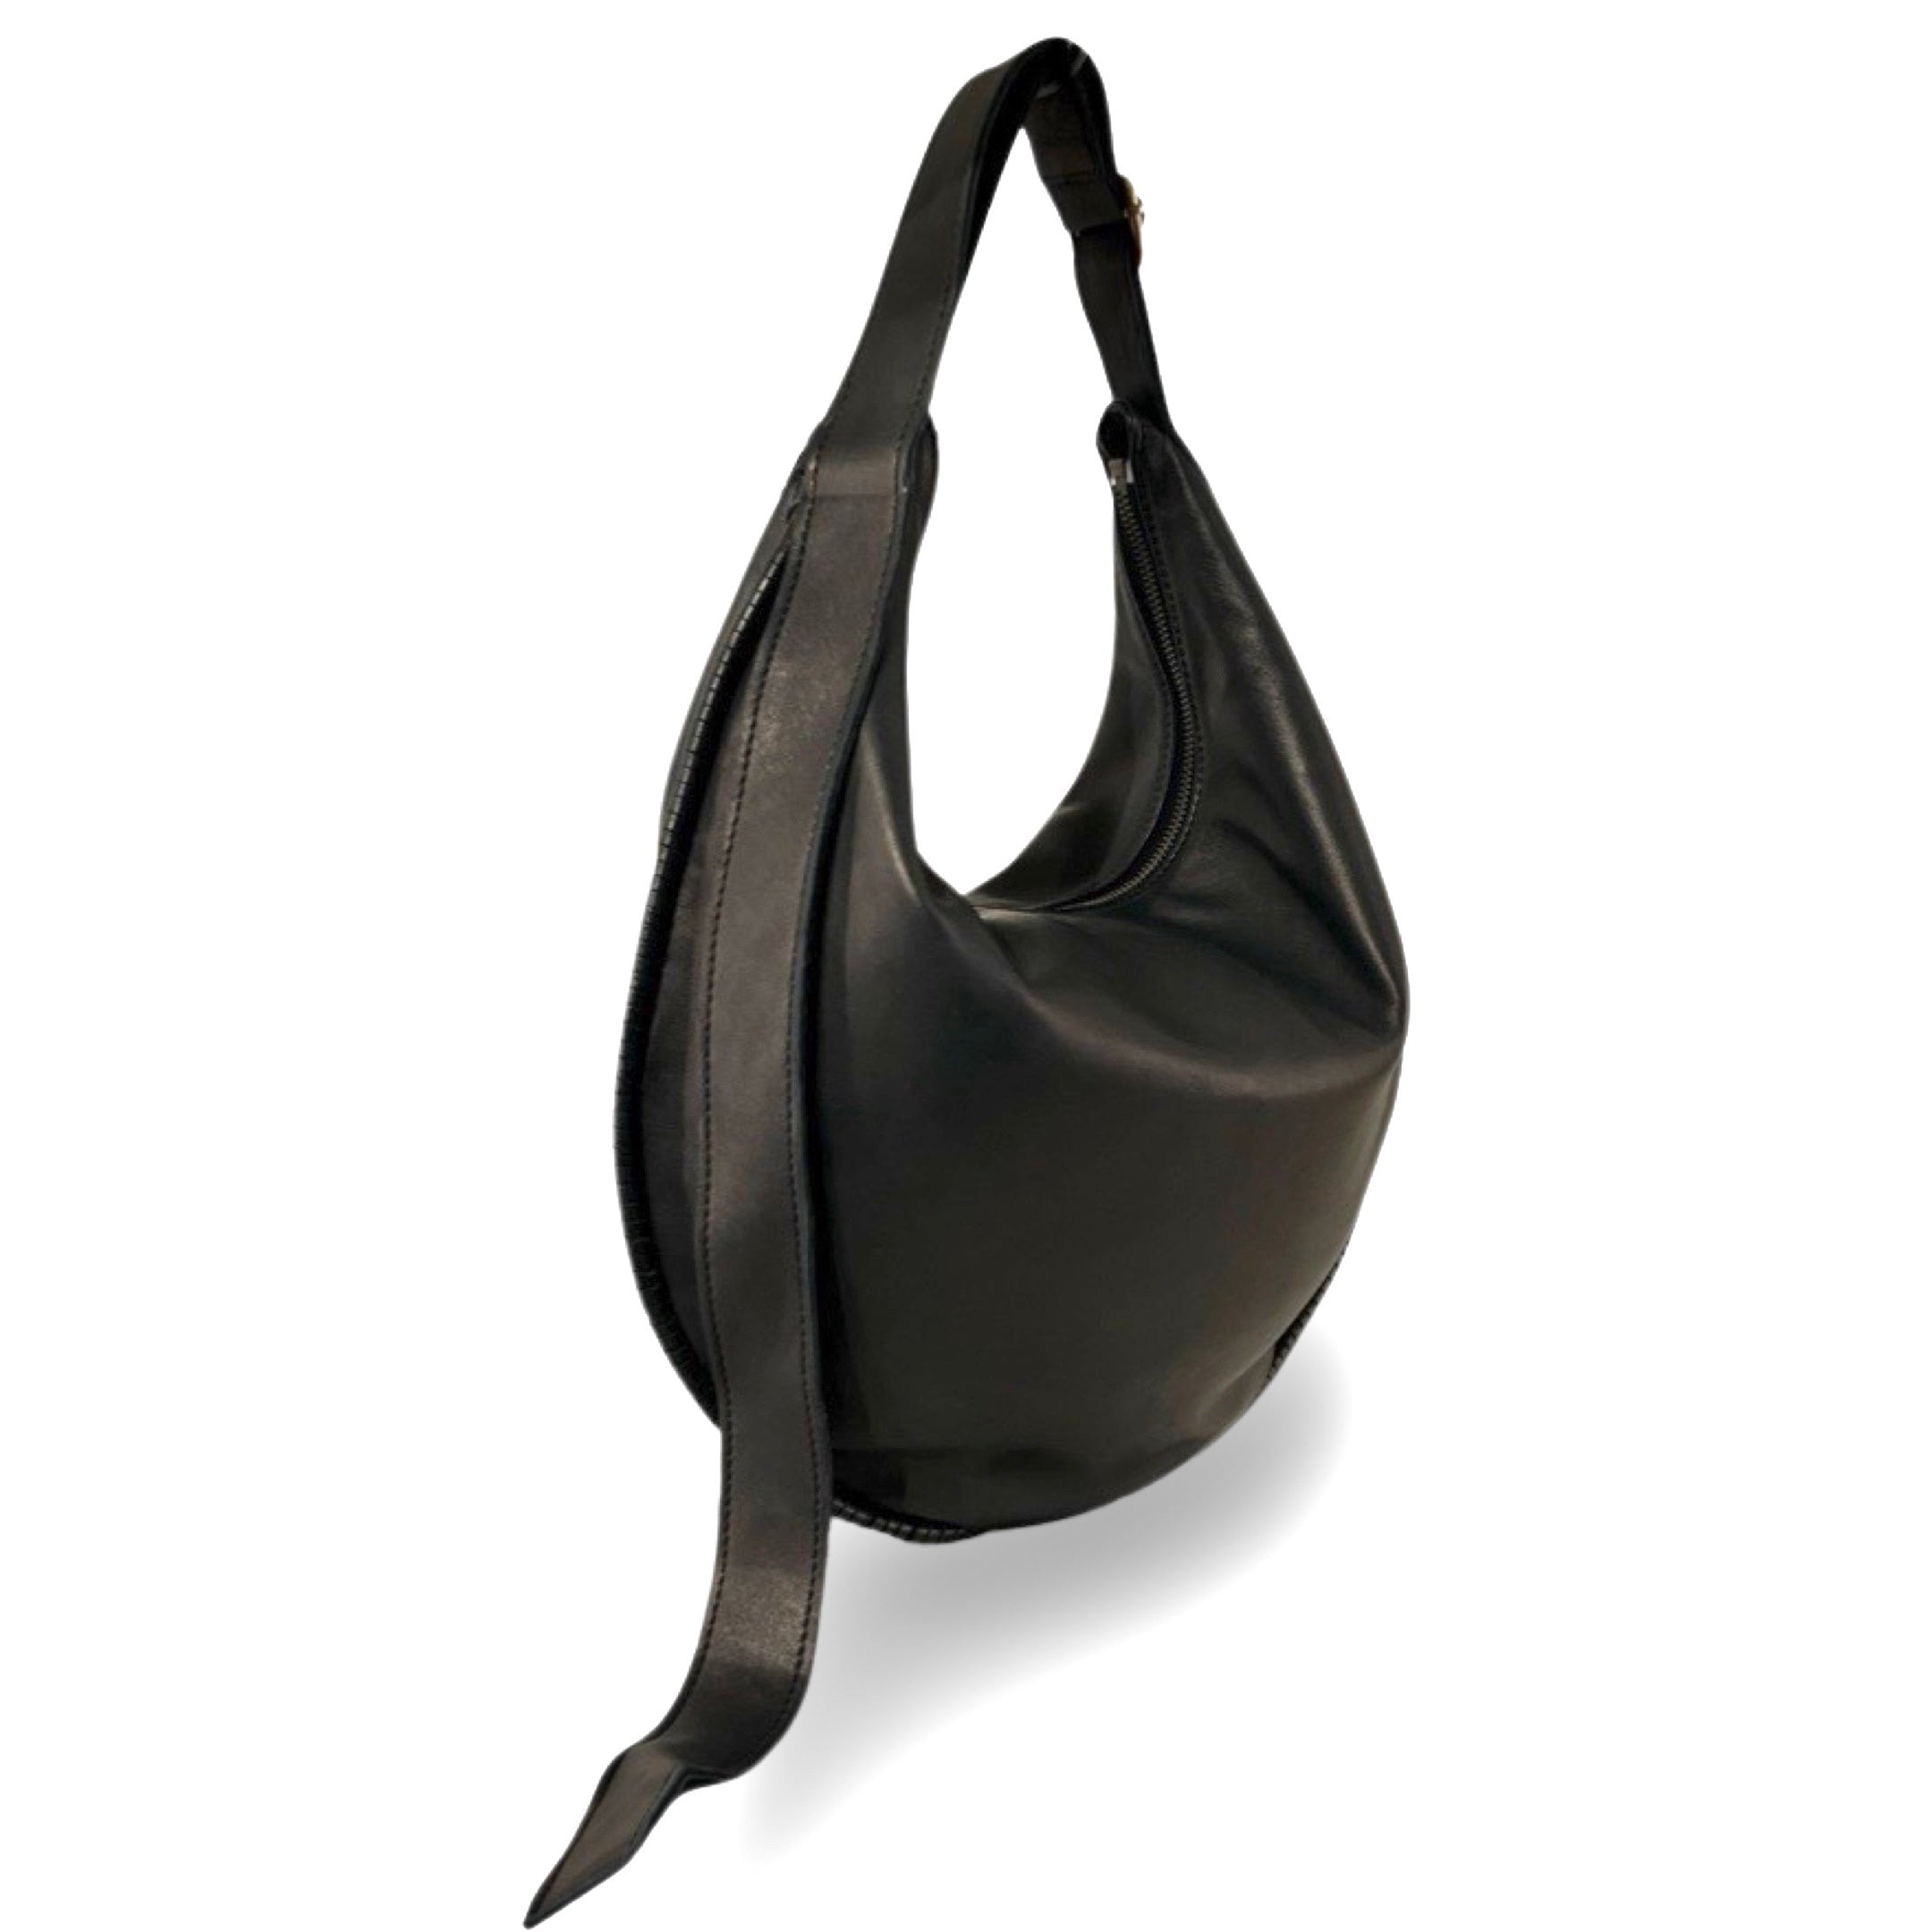 LABEL17 presents the Saddle Bag Ivy in Black, made of supple Lamb-Nappaleather